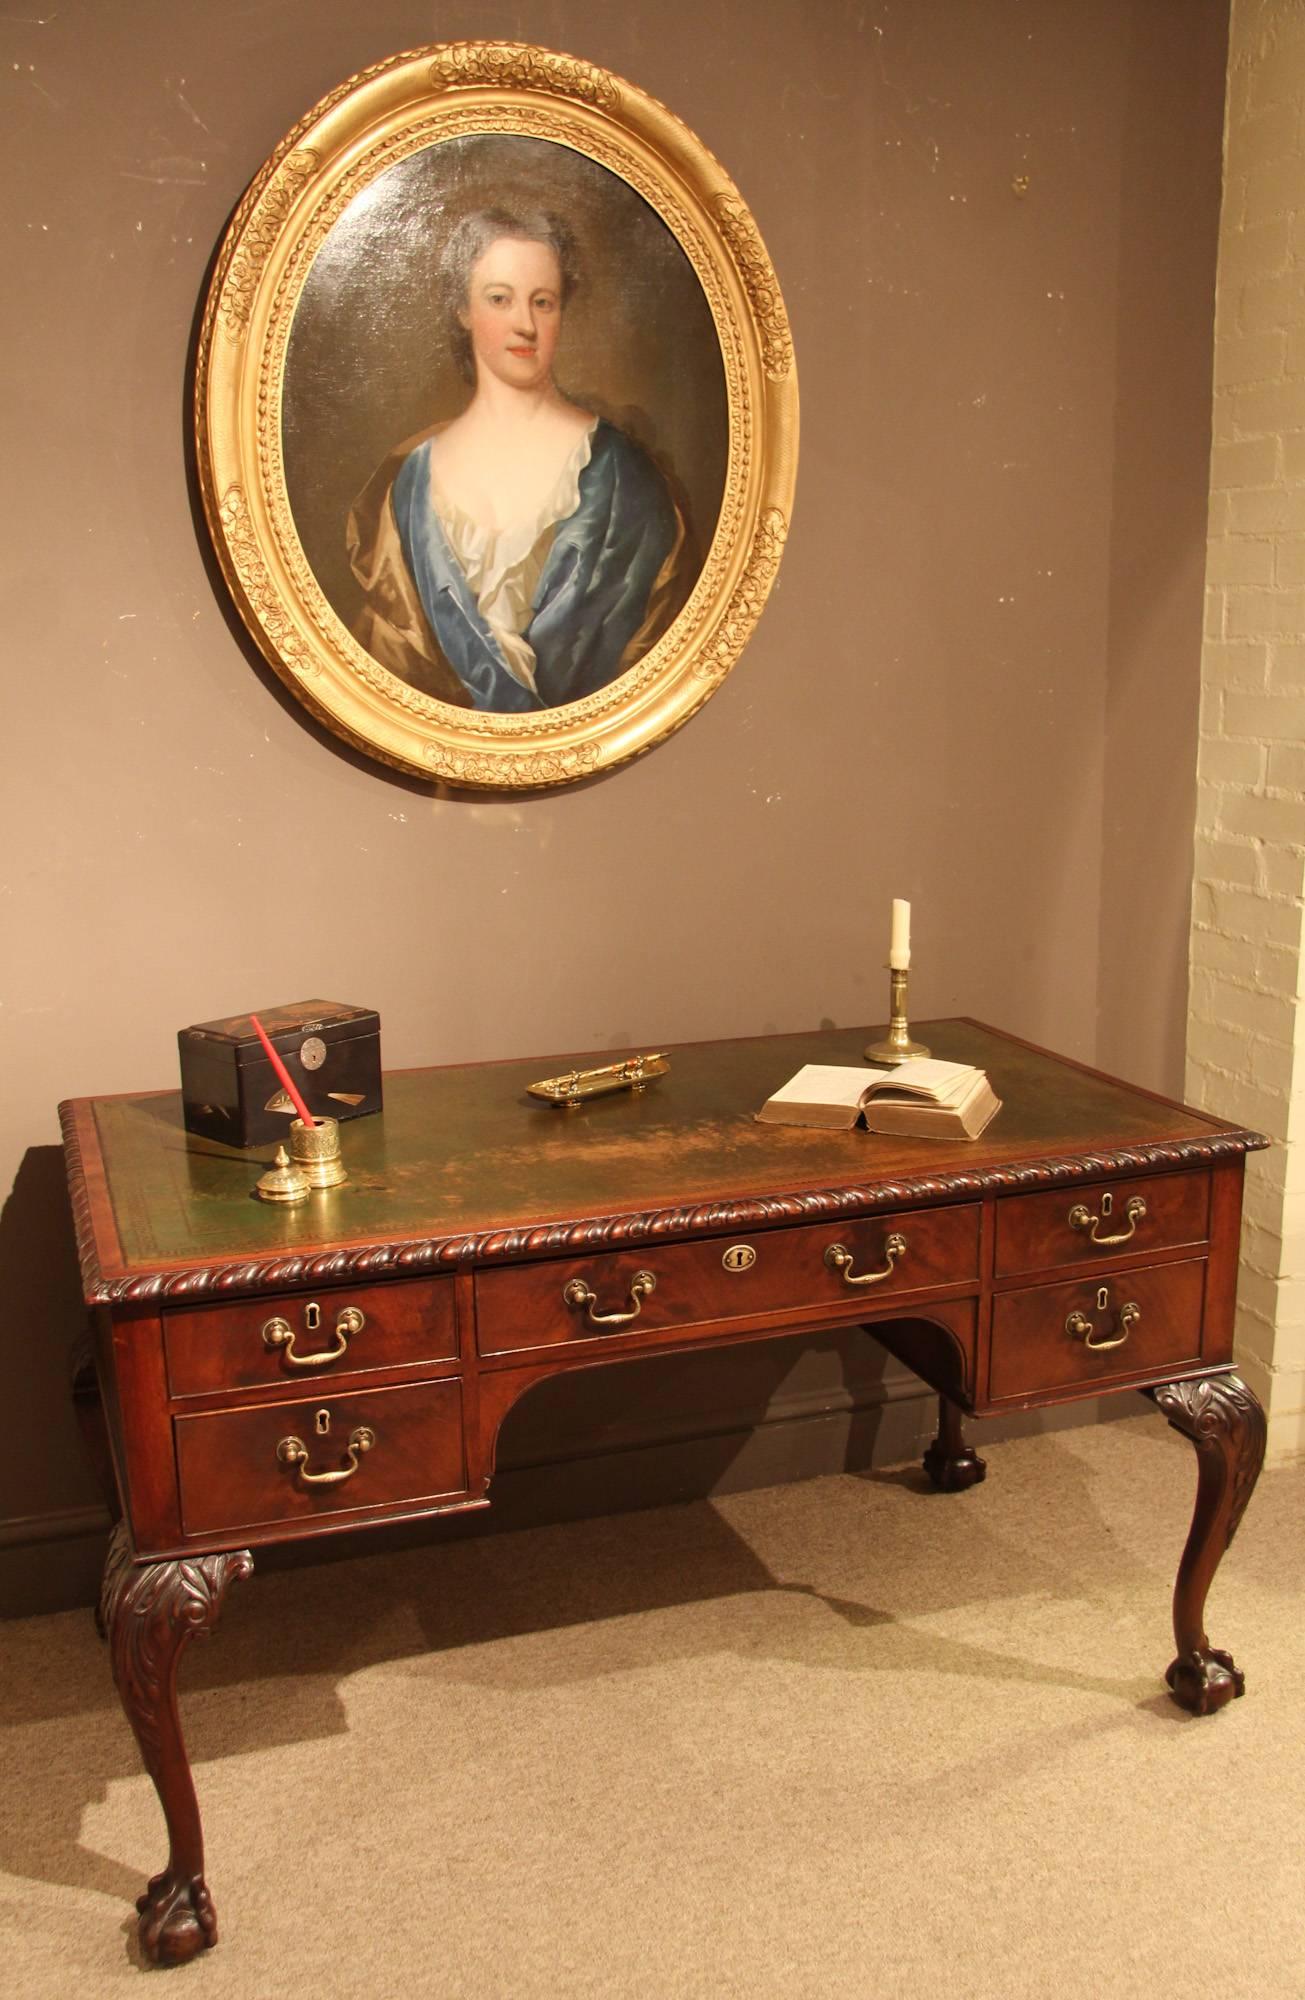 Mahogany George III style writing desk with tooled leather insert, cabriole legs.  Ball and claw feet, early 20th century.

Please note – this is only available to view by appointment only.

All of the items that we advertise for sale have been